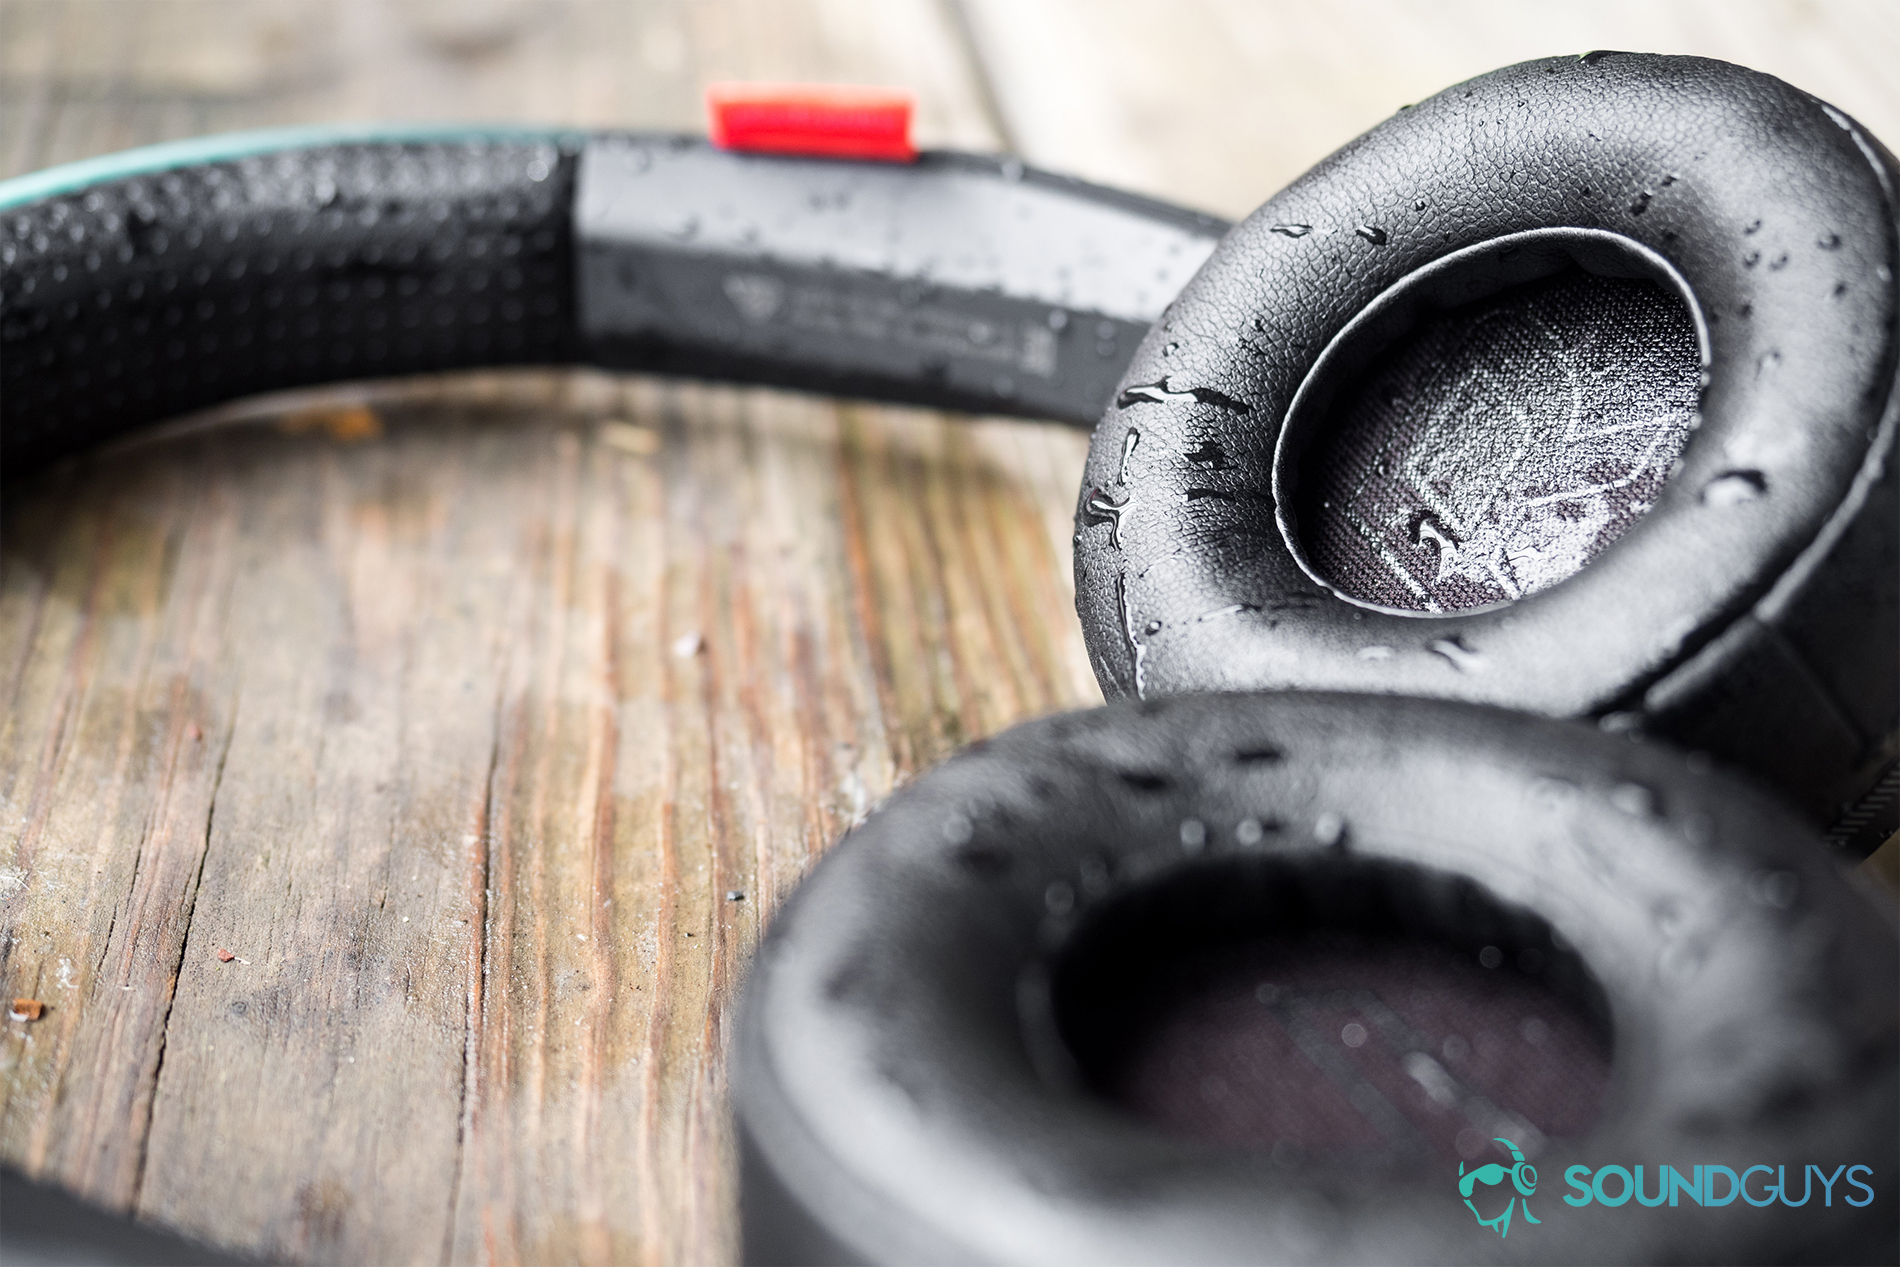 The P2i water-repellent coating isn't as good as an official IP rating, but after soaking the ear cups, the headphones held up without any issues. Pictured: The Plantronics BackBeat 500 FIT lying flat on a wood surface with water on the ear cups.